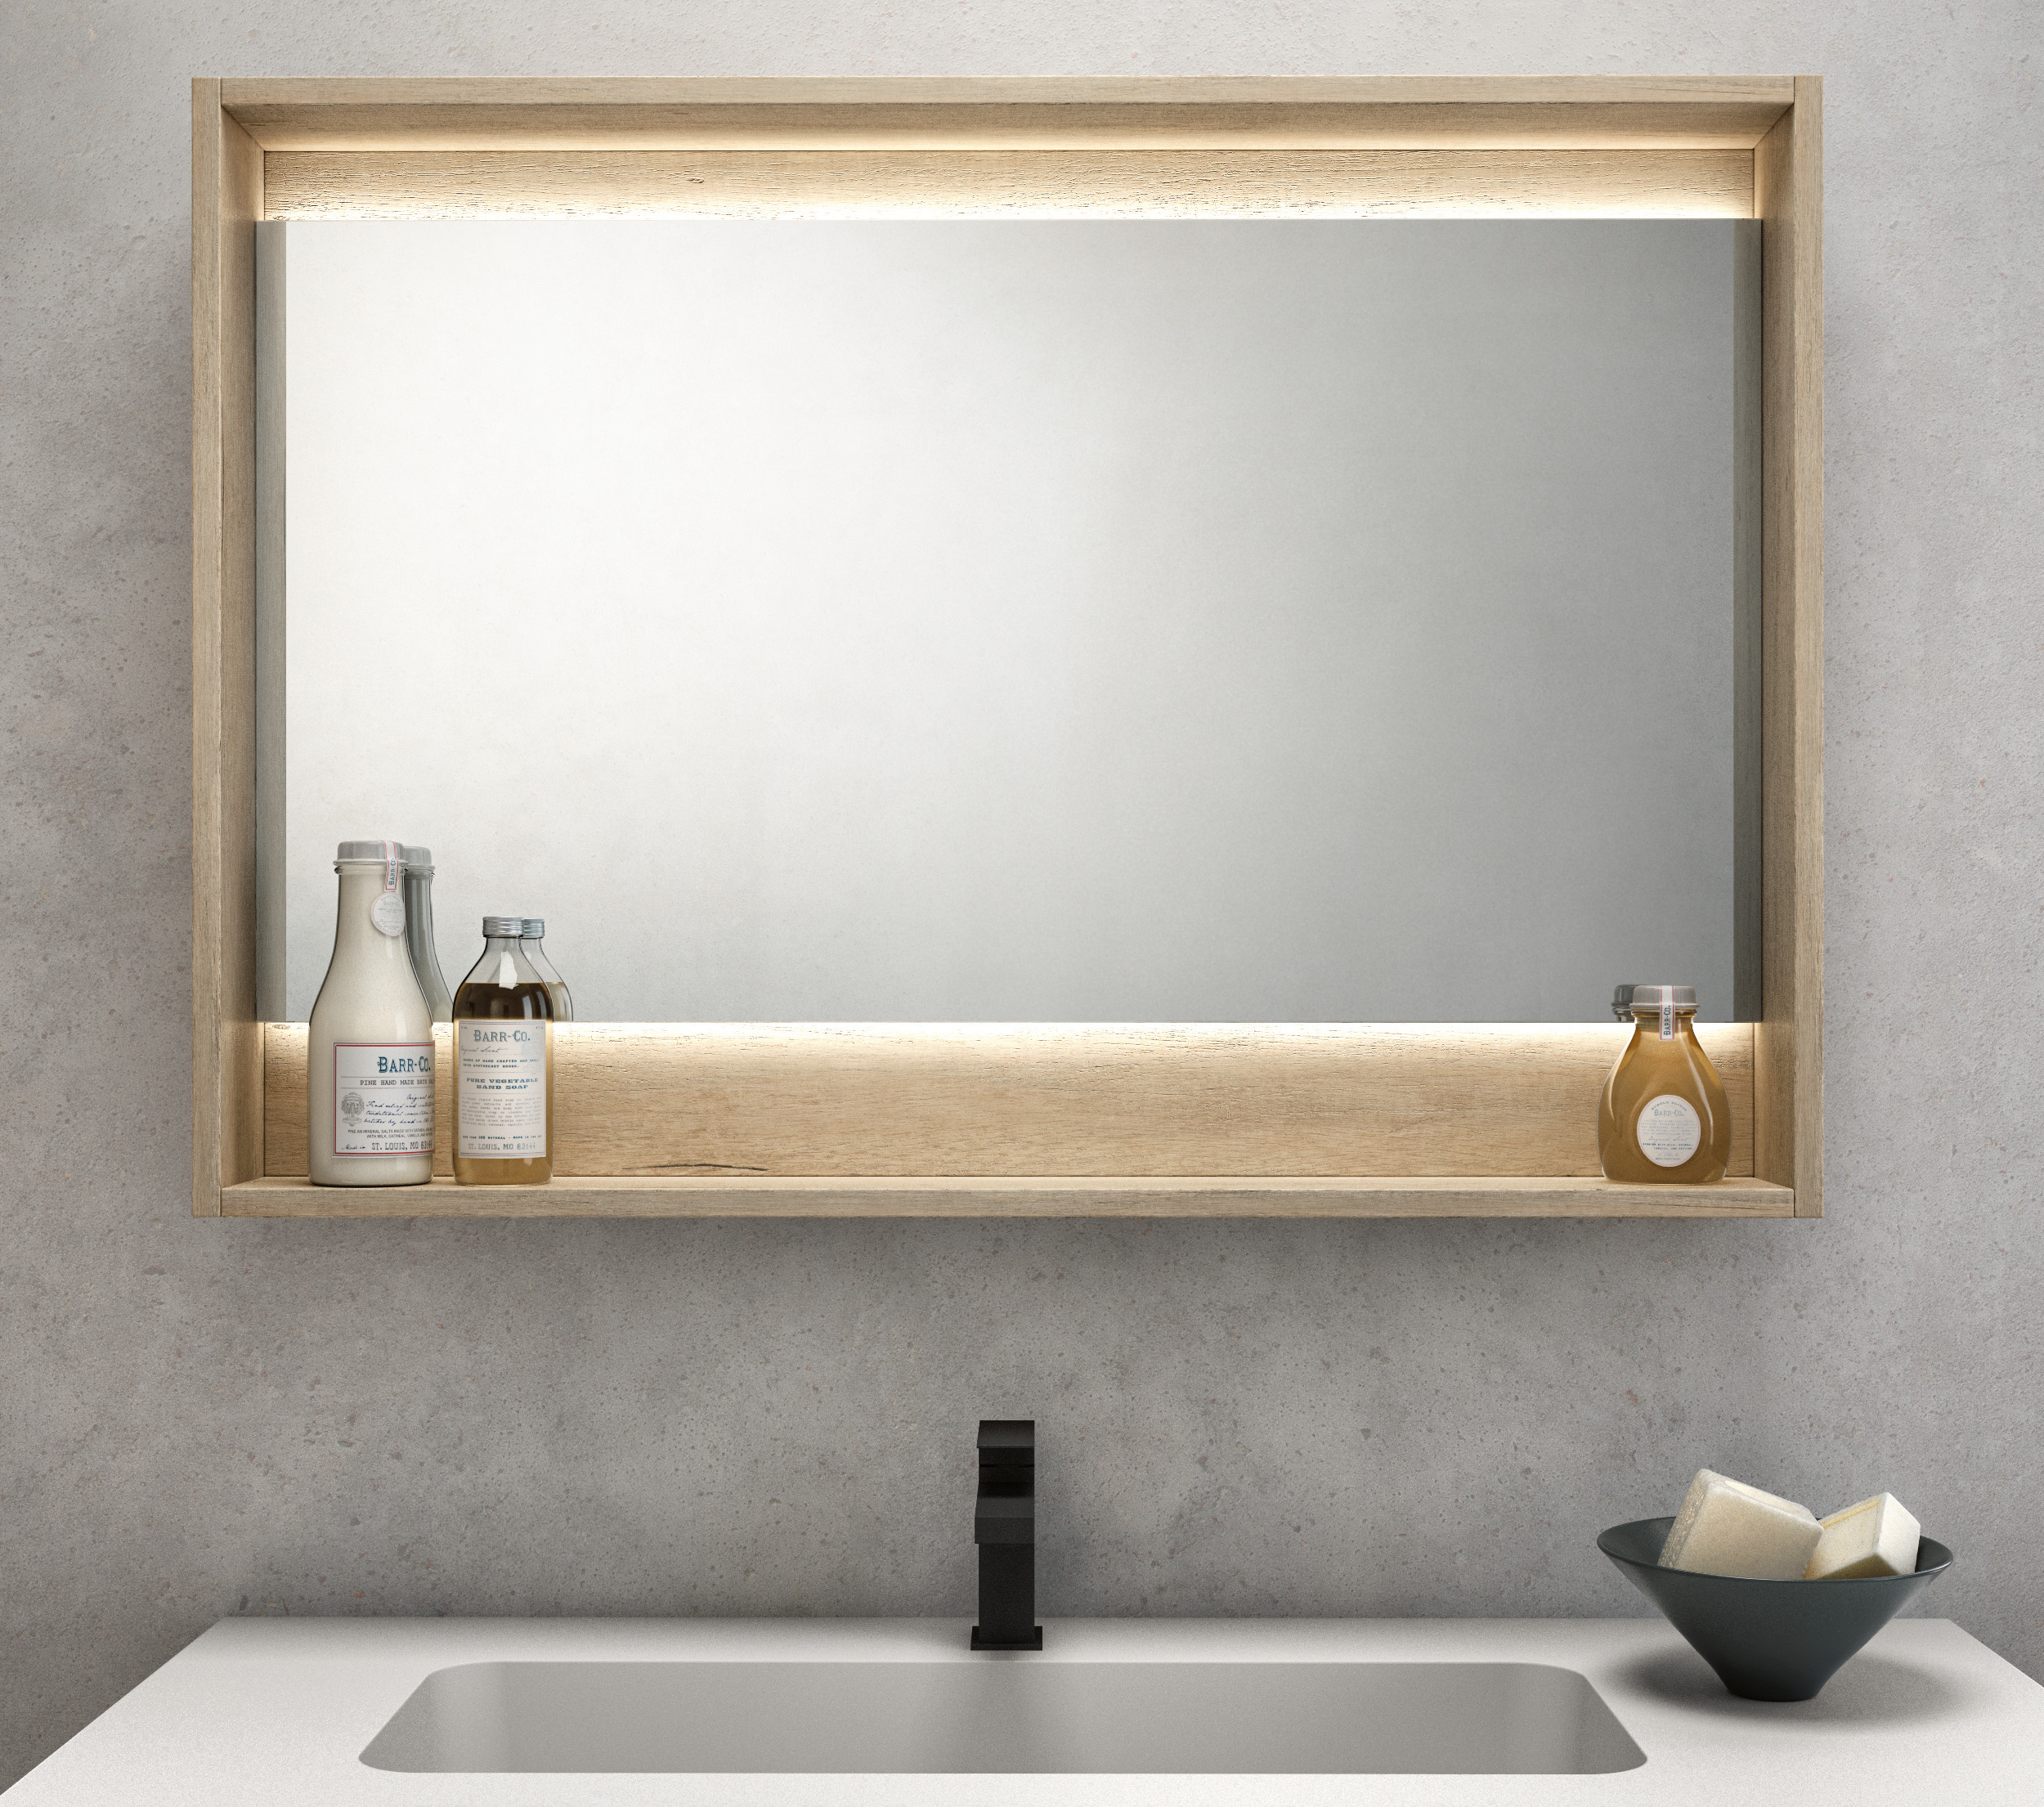 7 Medicine Cabinets That Will Upgrade, Medicine Cabinet With Mirror For Small Bathroom